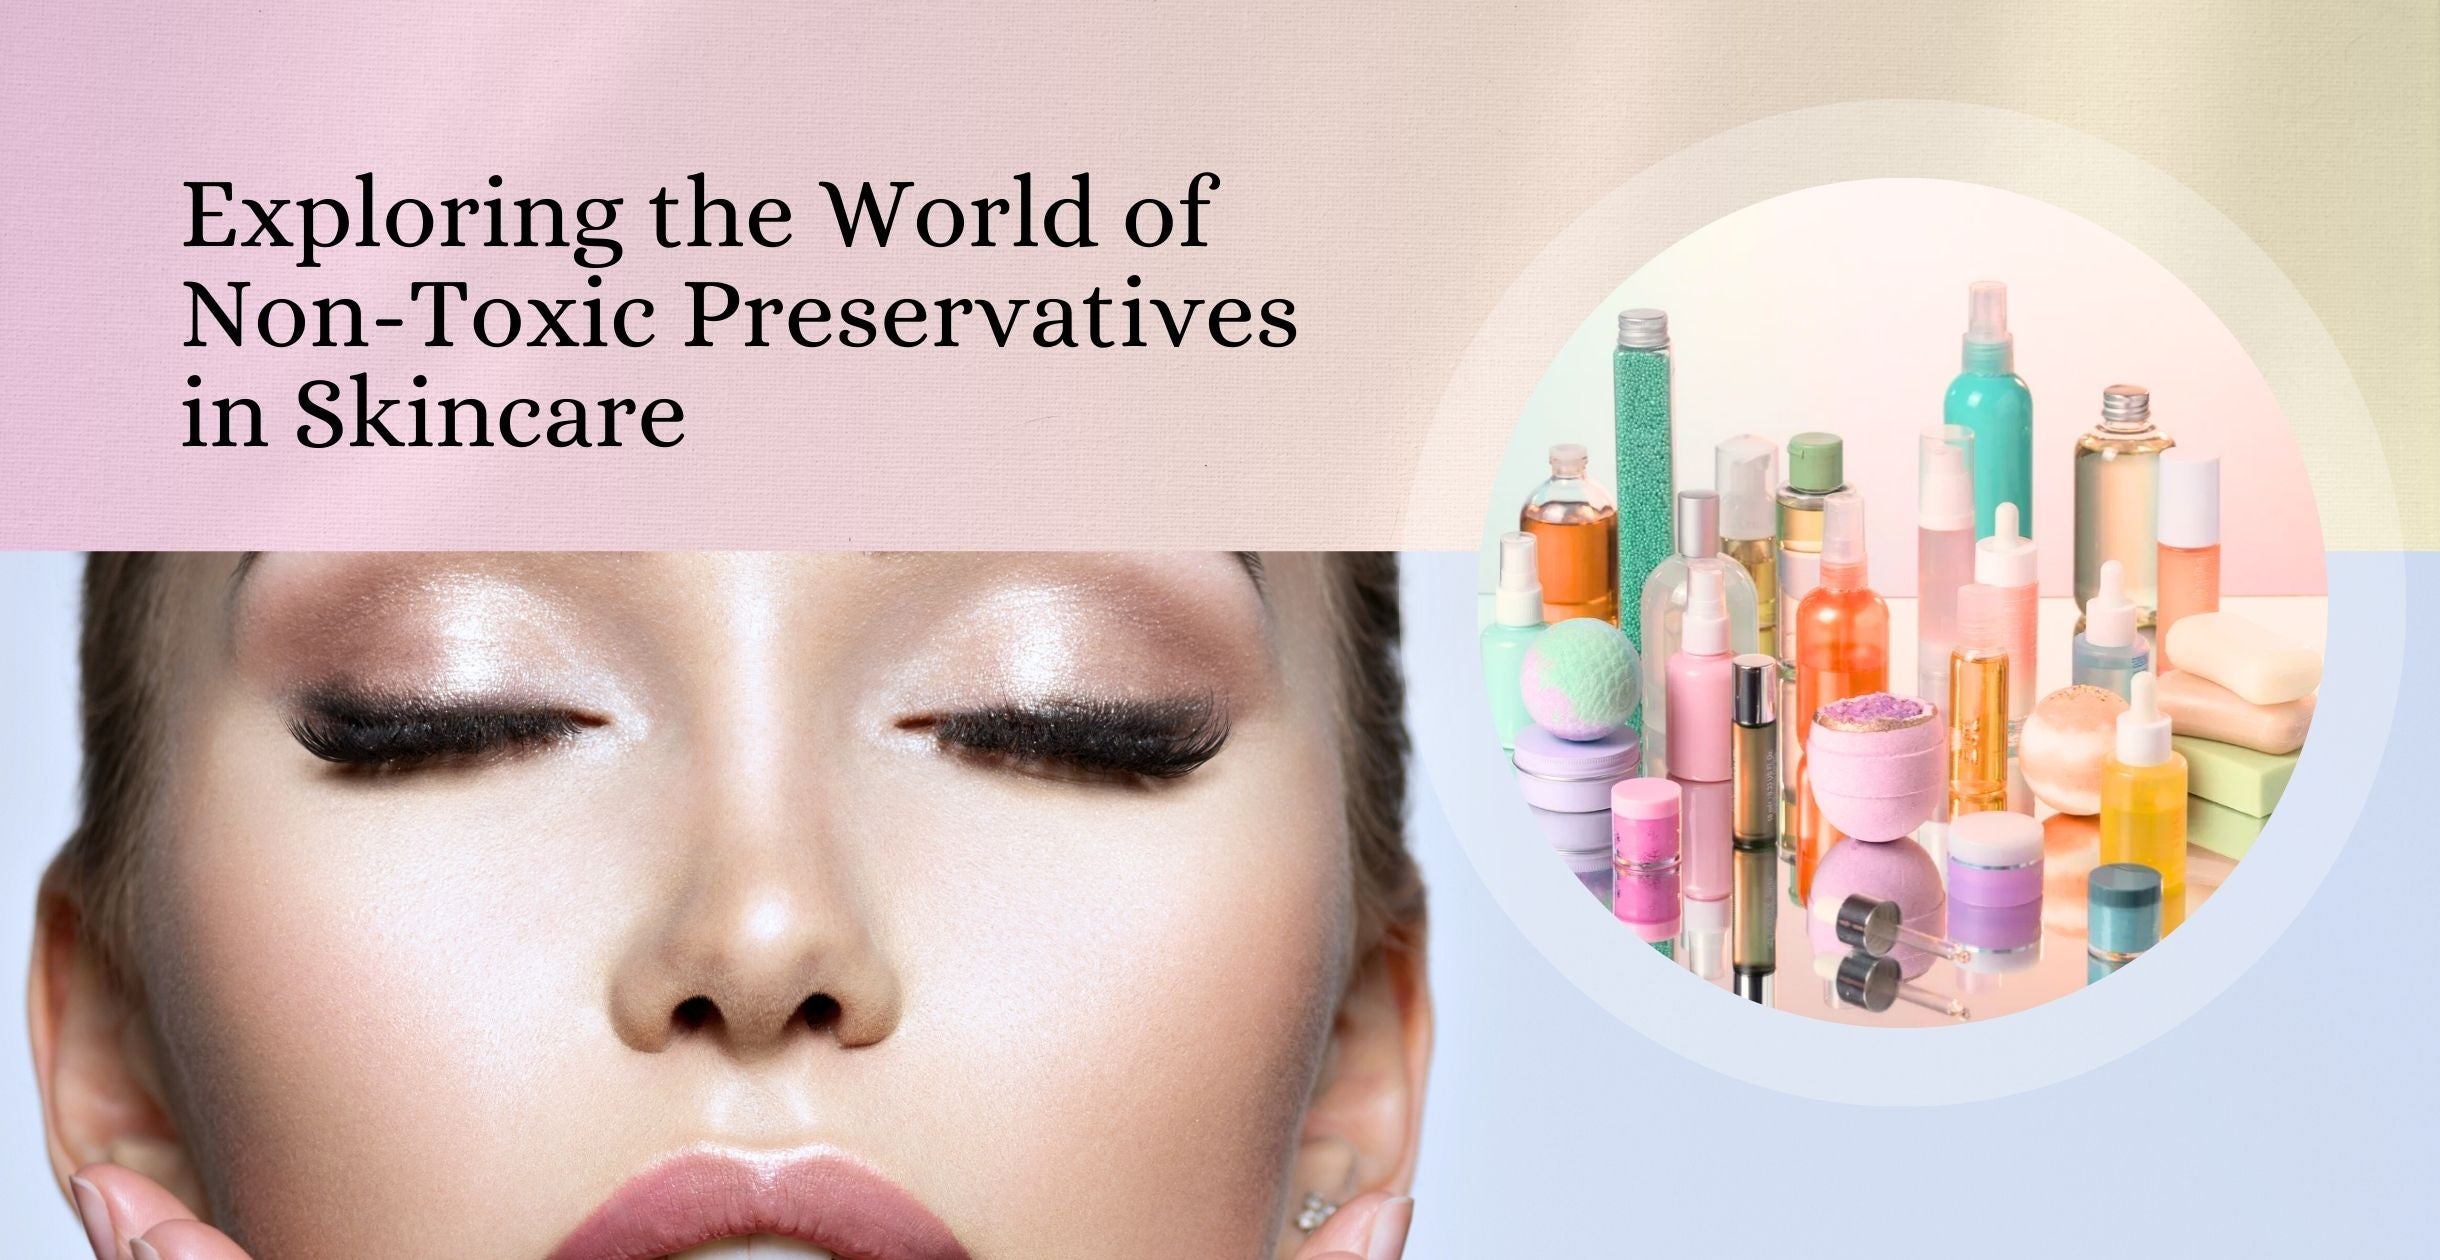 Exploring the World of Non-Toxic Preservatives in Skincare